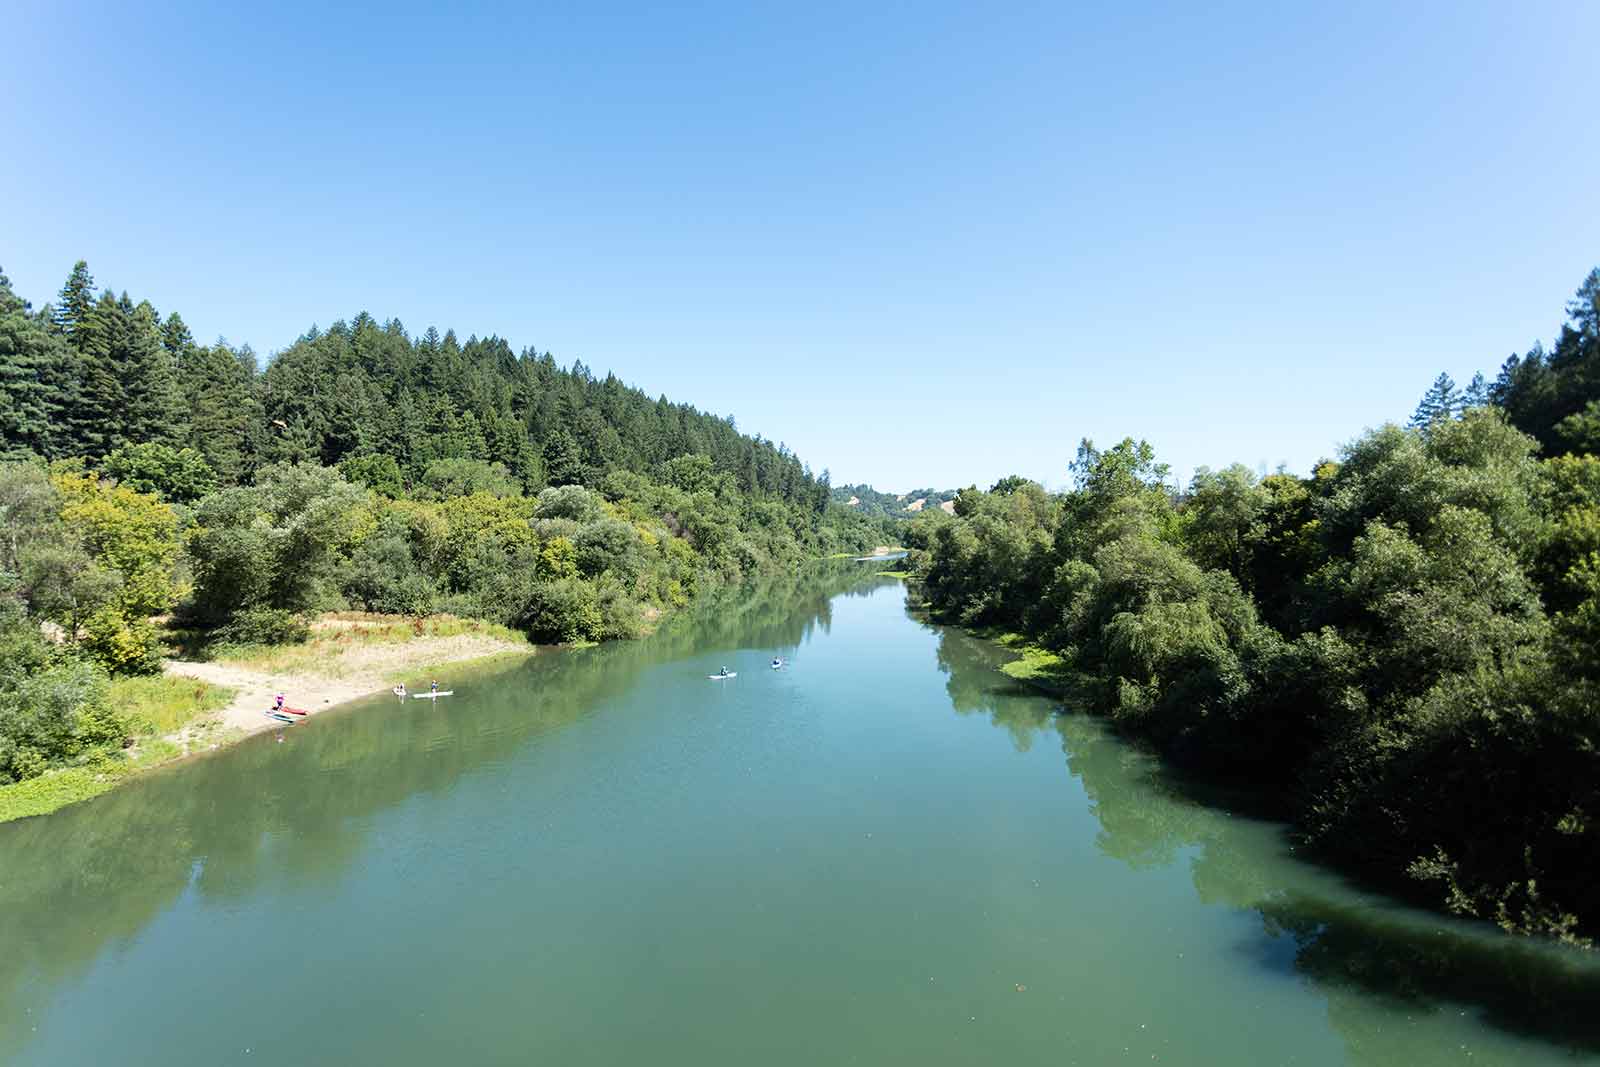 russian river: shot down the dark blue river lined with lush green redwood trees